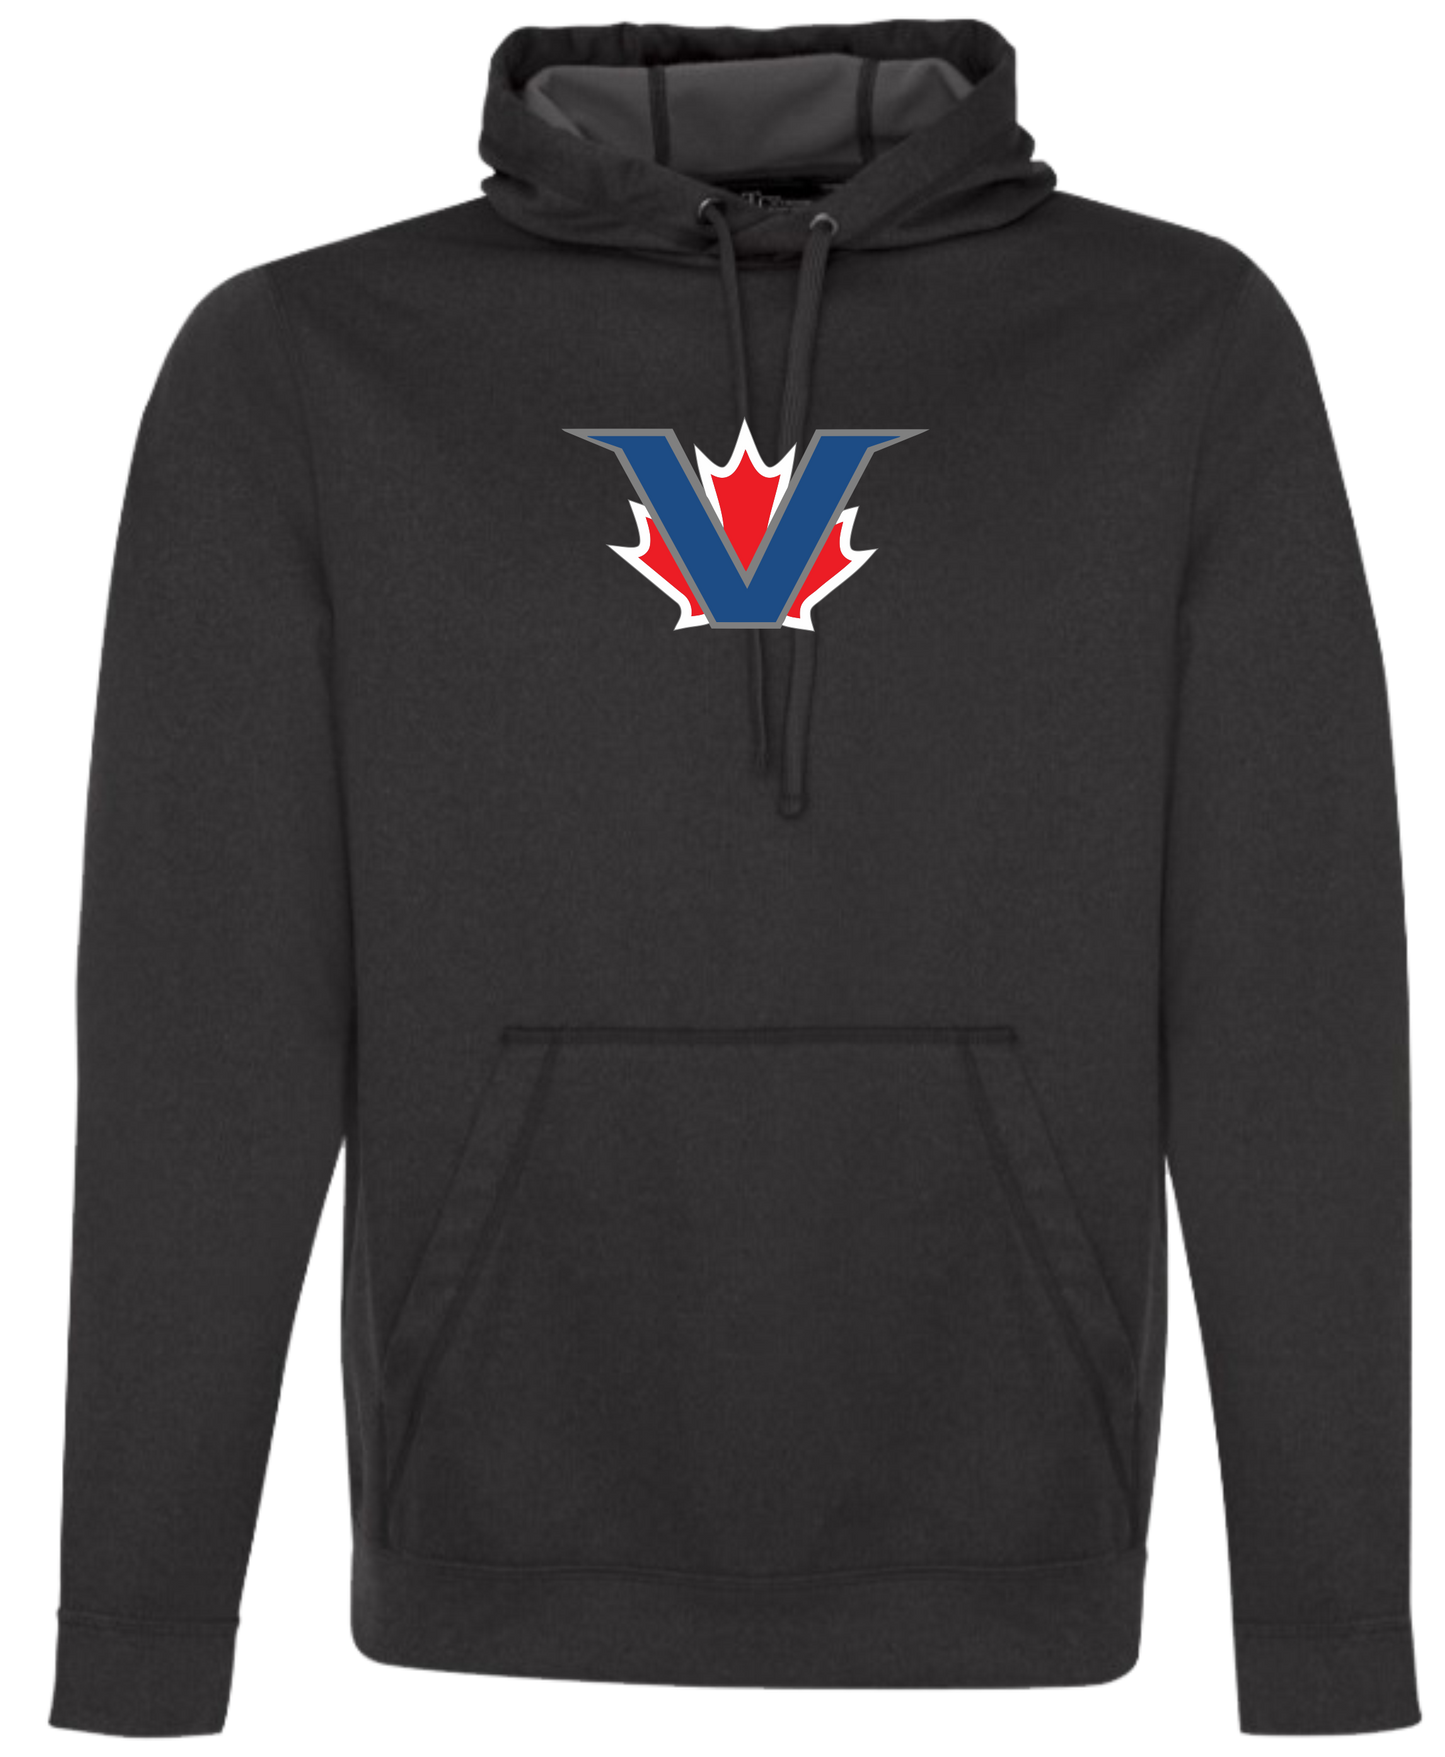 Victoria Capitals North Baseball Unisex and Youth DriFit PullOver Hoodie